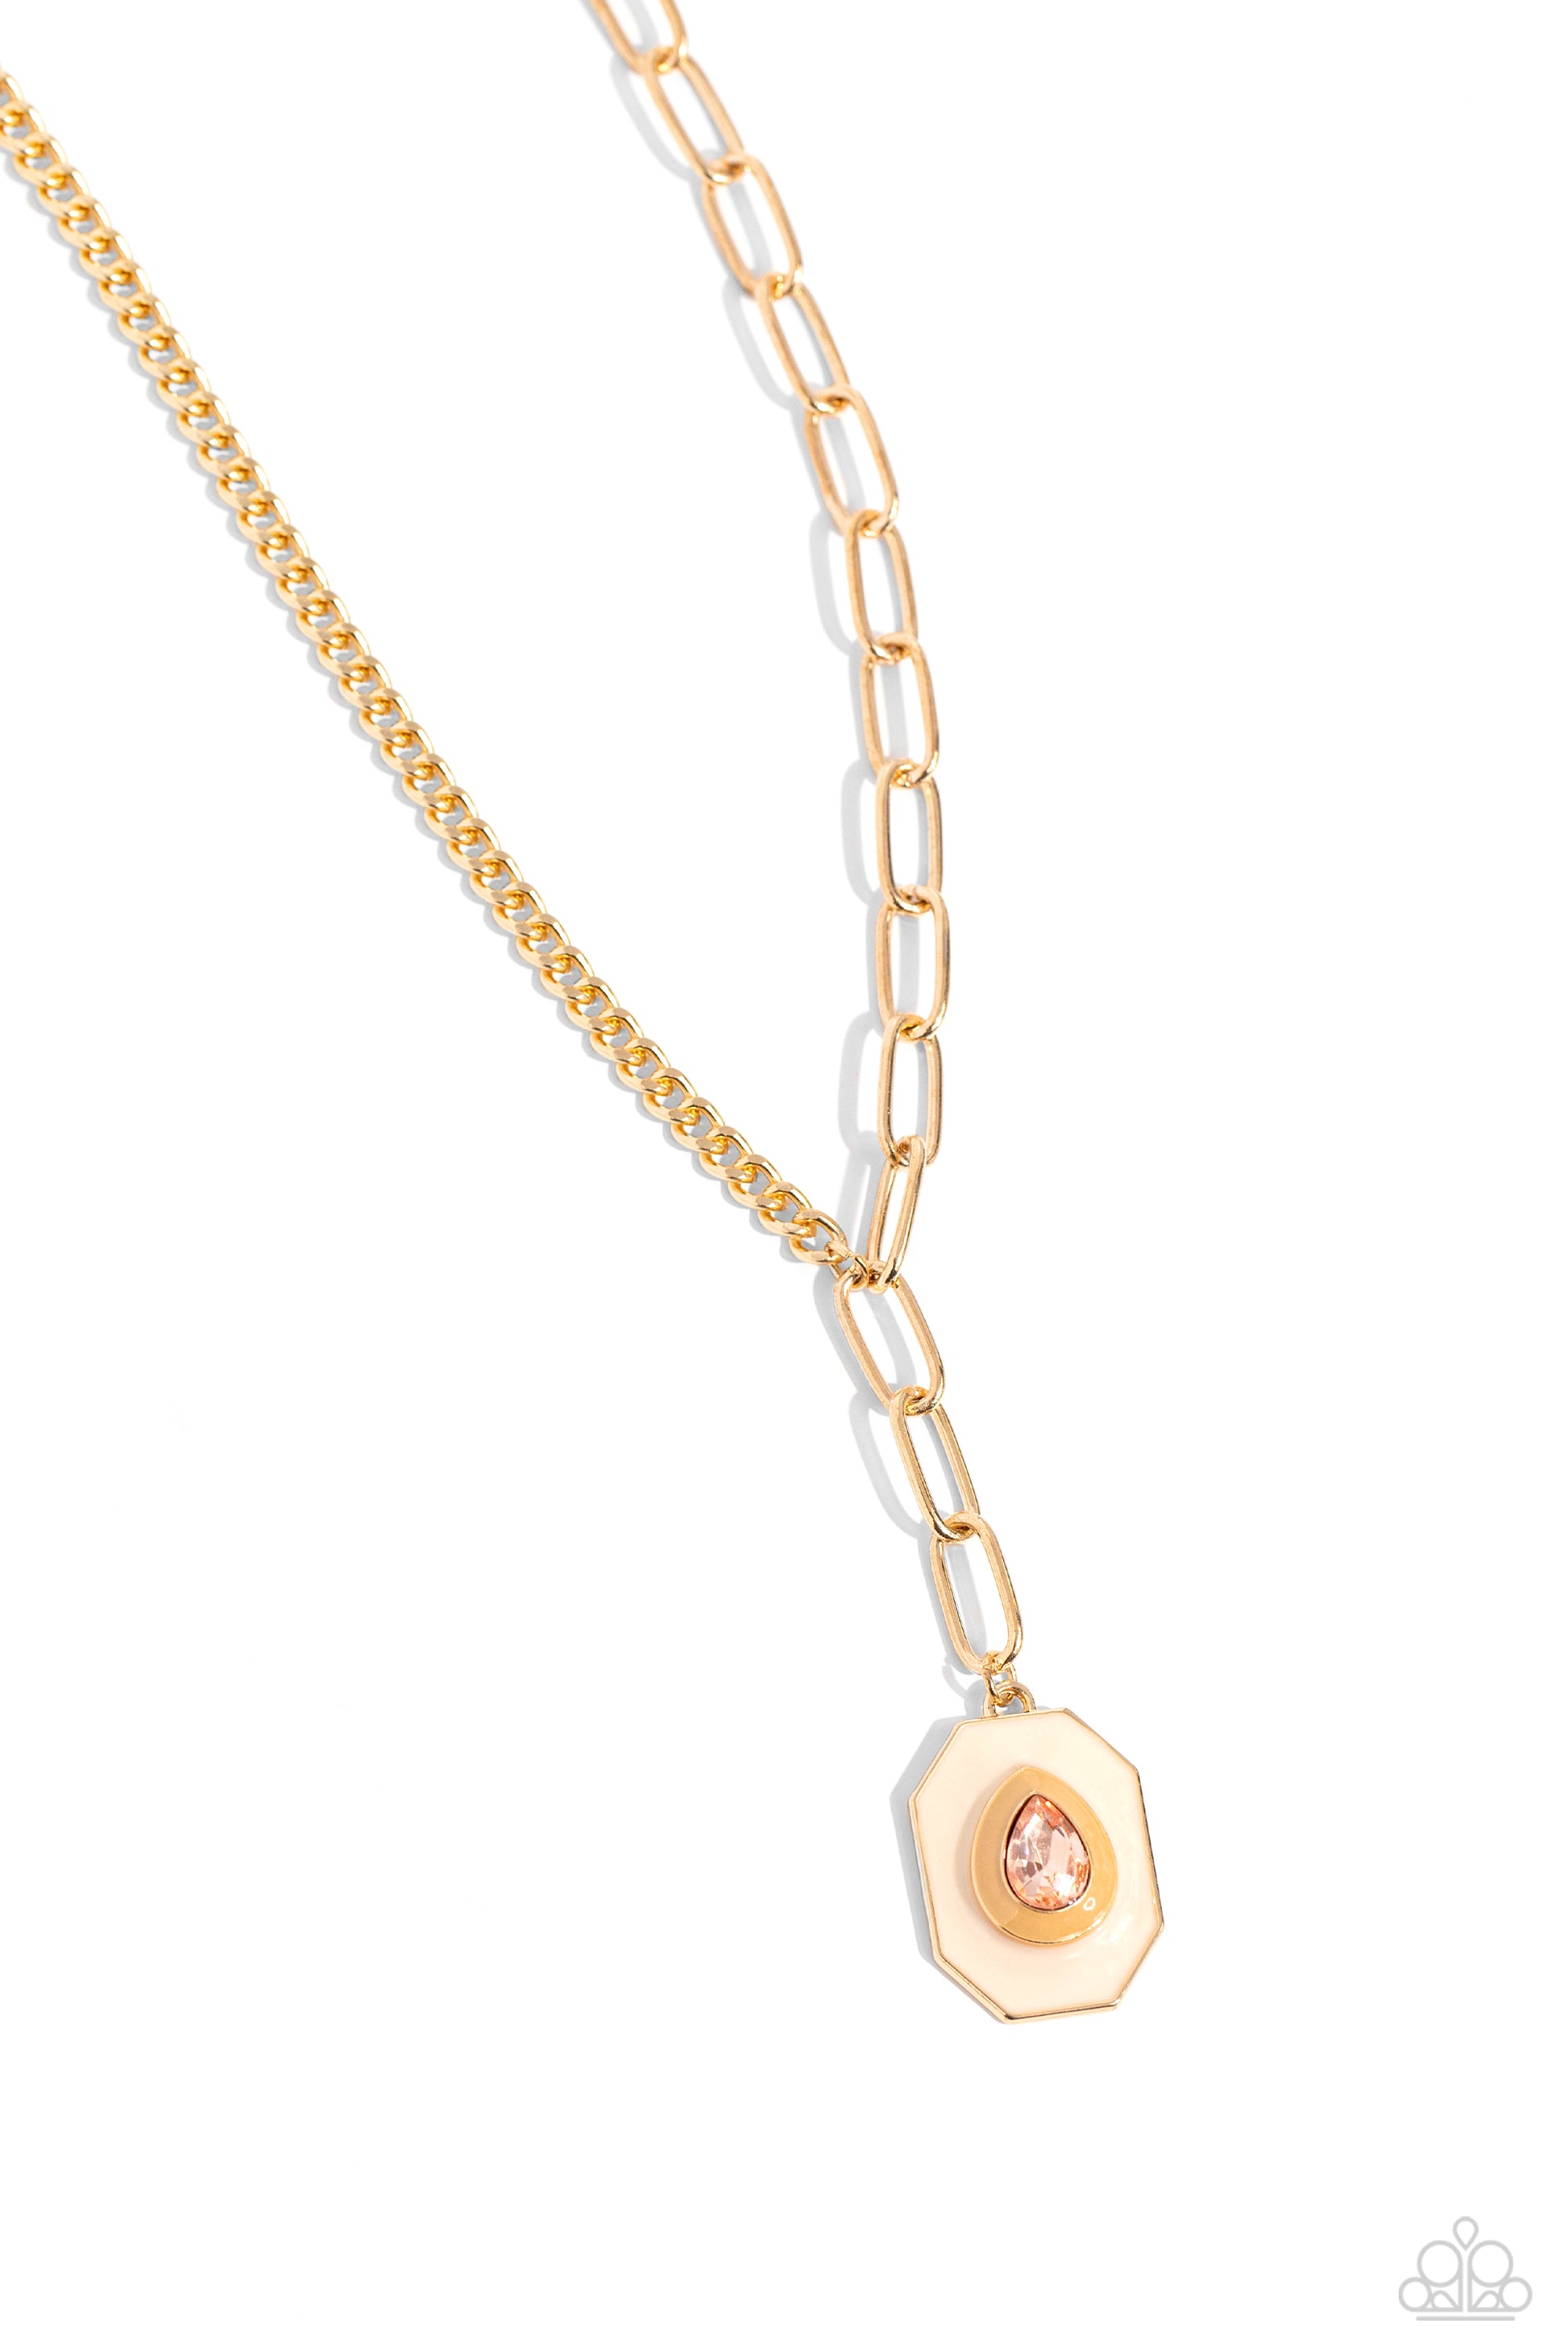 Paparazzi Accessories - Hexagonal Hallmark - Brown Necelongated strand of classic gold chain connects to a strand of elongated gold paperclip chain, creating a contrasting blend of grit. Pressed in a Doe-painted teardrop frame, a peach teardrop gem rests atop a Tender Peach-painted hexagonal pendant, perfectly balancing the design with a spritz of colorful glitz. Features an adjustable clasp closure. Featured inside The Preview at Made for More!